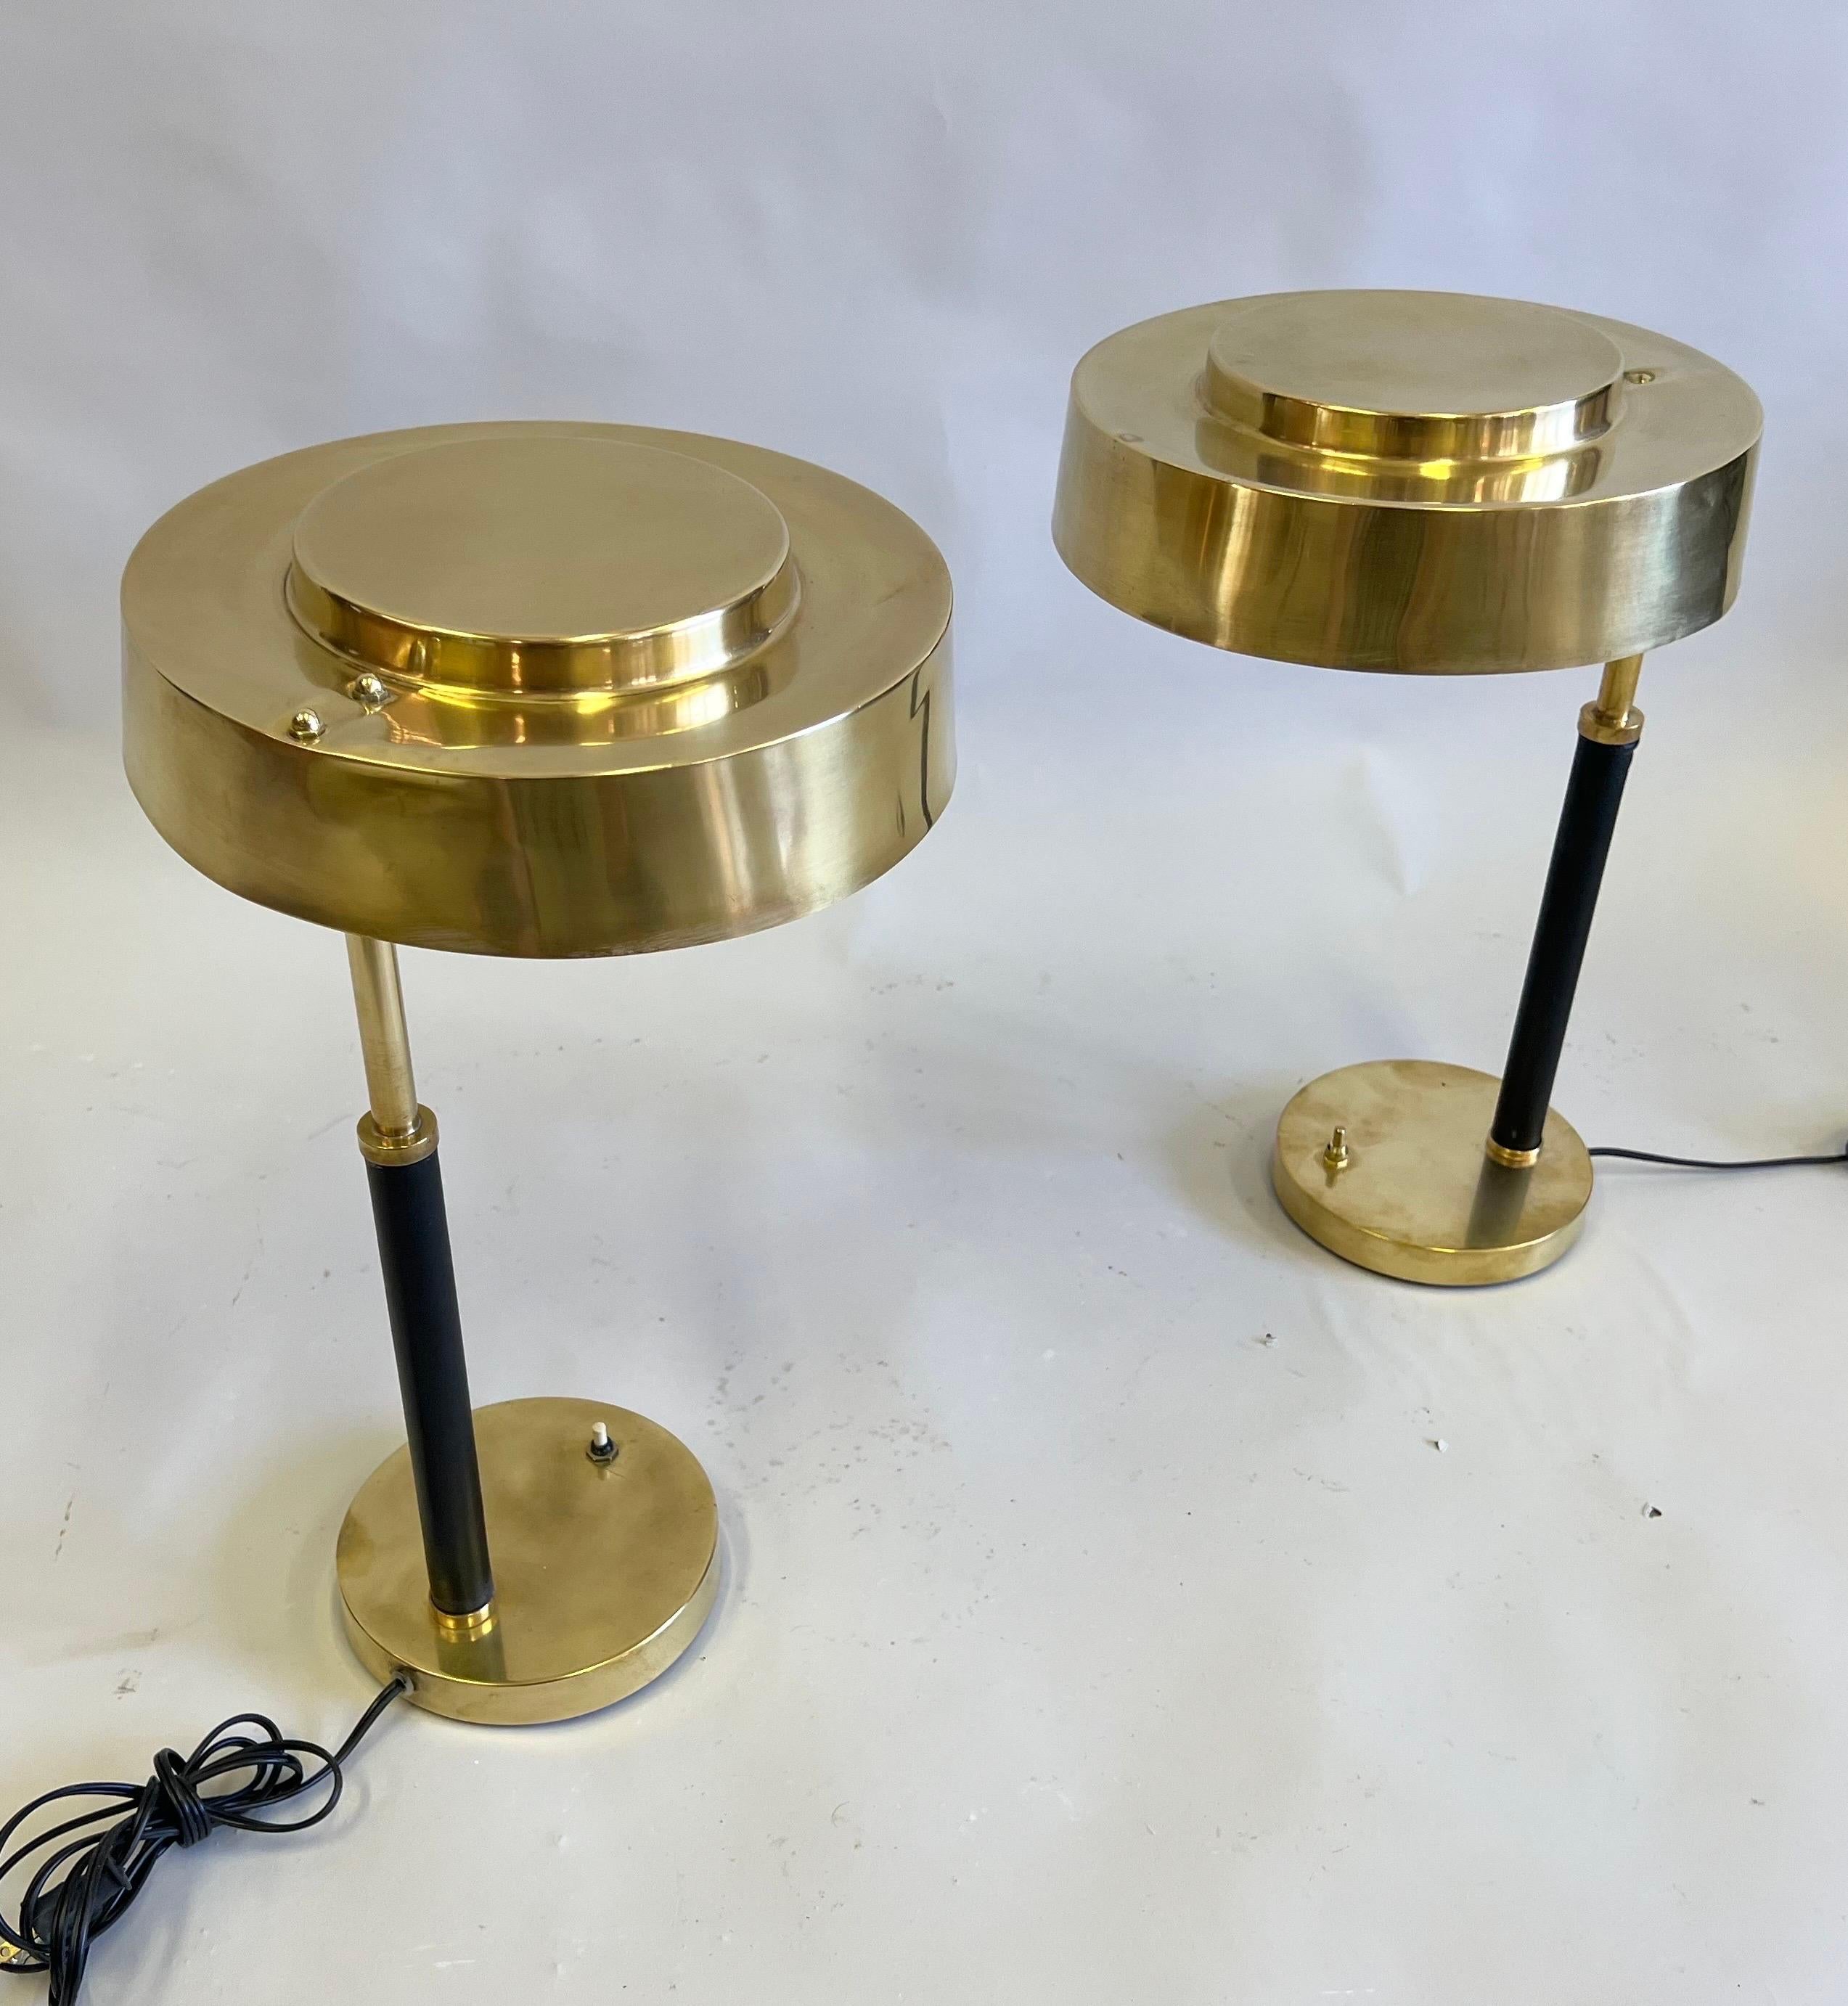 An Elegant and Timeless Pair of French Mid-Century Modern late / Art Deco table or desk lamps in solid brass with the stems delicately wrapped in black leather. The lamps are attributed to Jacques Adnet circa 1930 -1935 and are emblematic of the